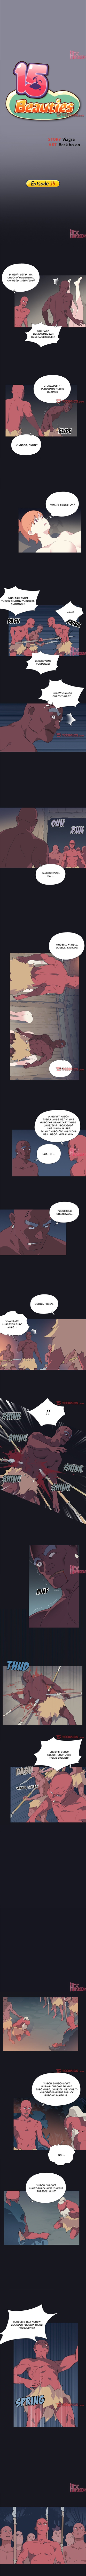 15 Beauties - Chapter 16 Page 1